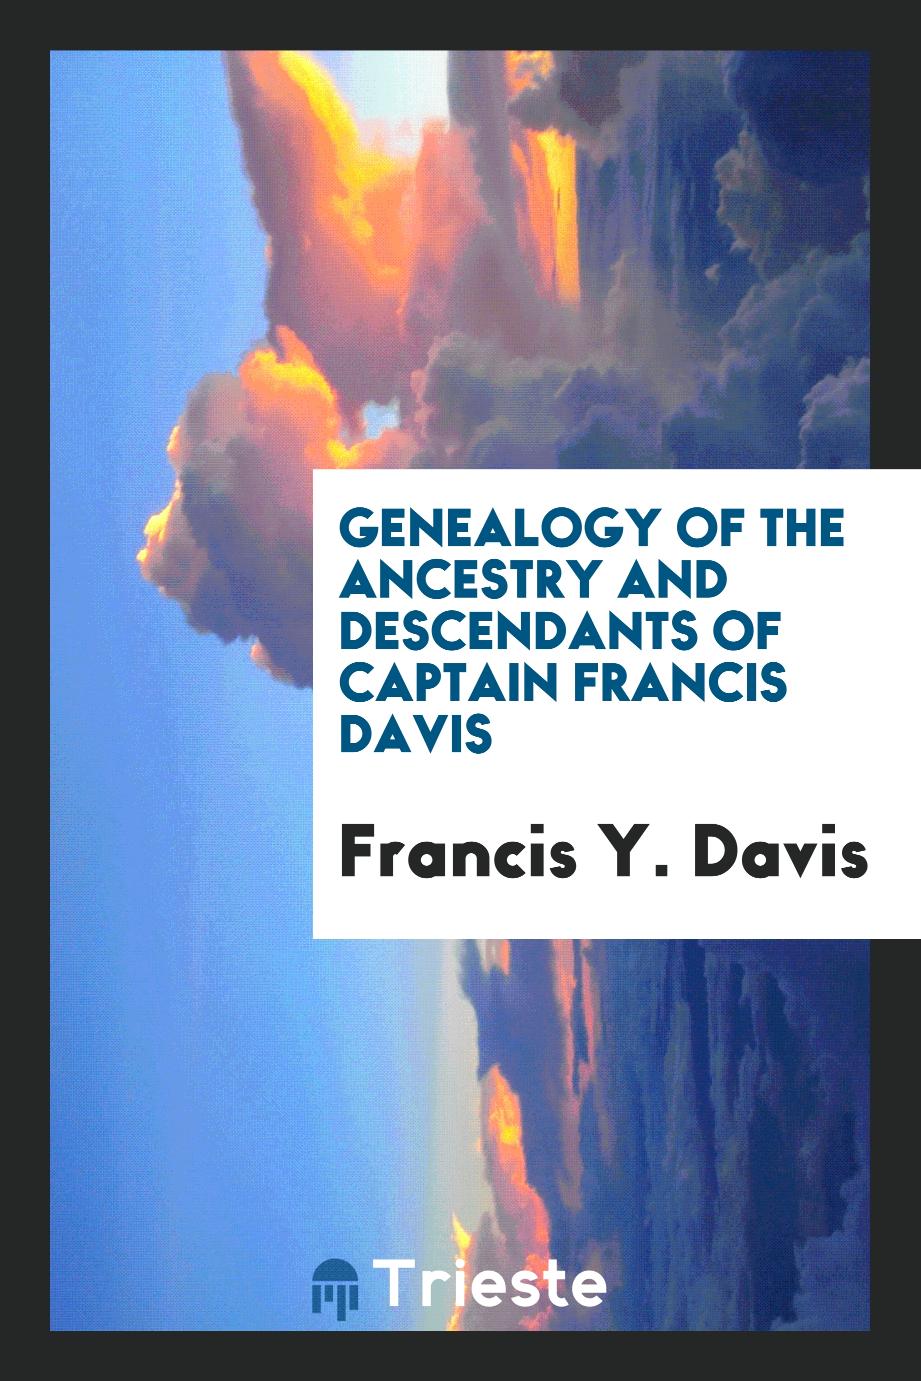 Genealogy of the Ancestry and Descendants of Captain Francis Davis